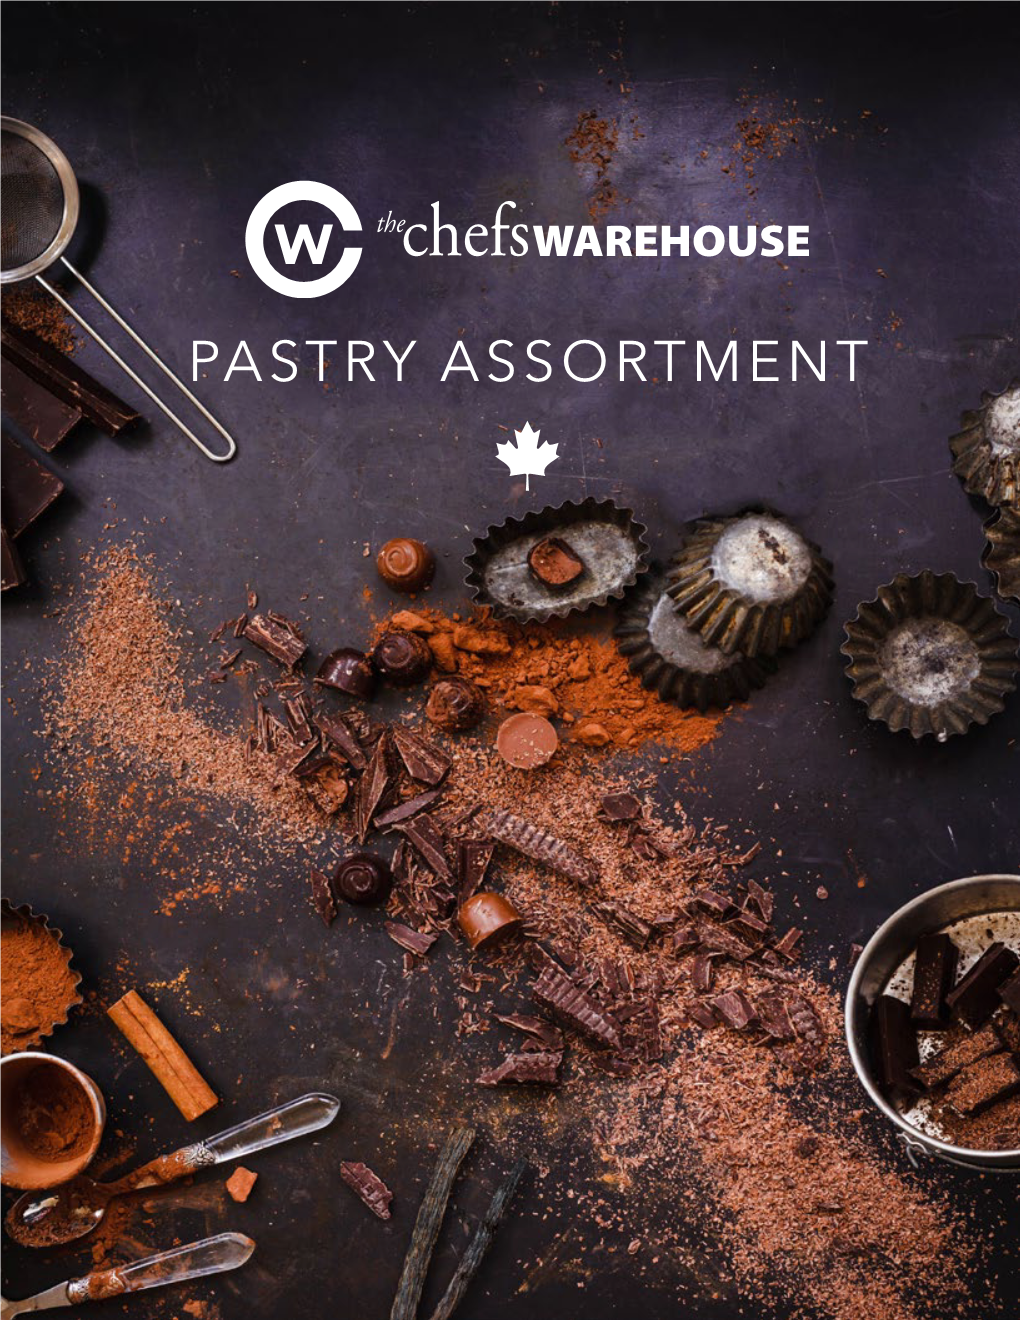 Pastry Assortment Table of Contents